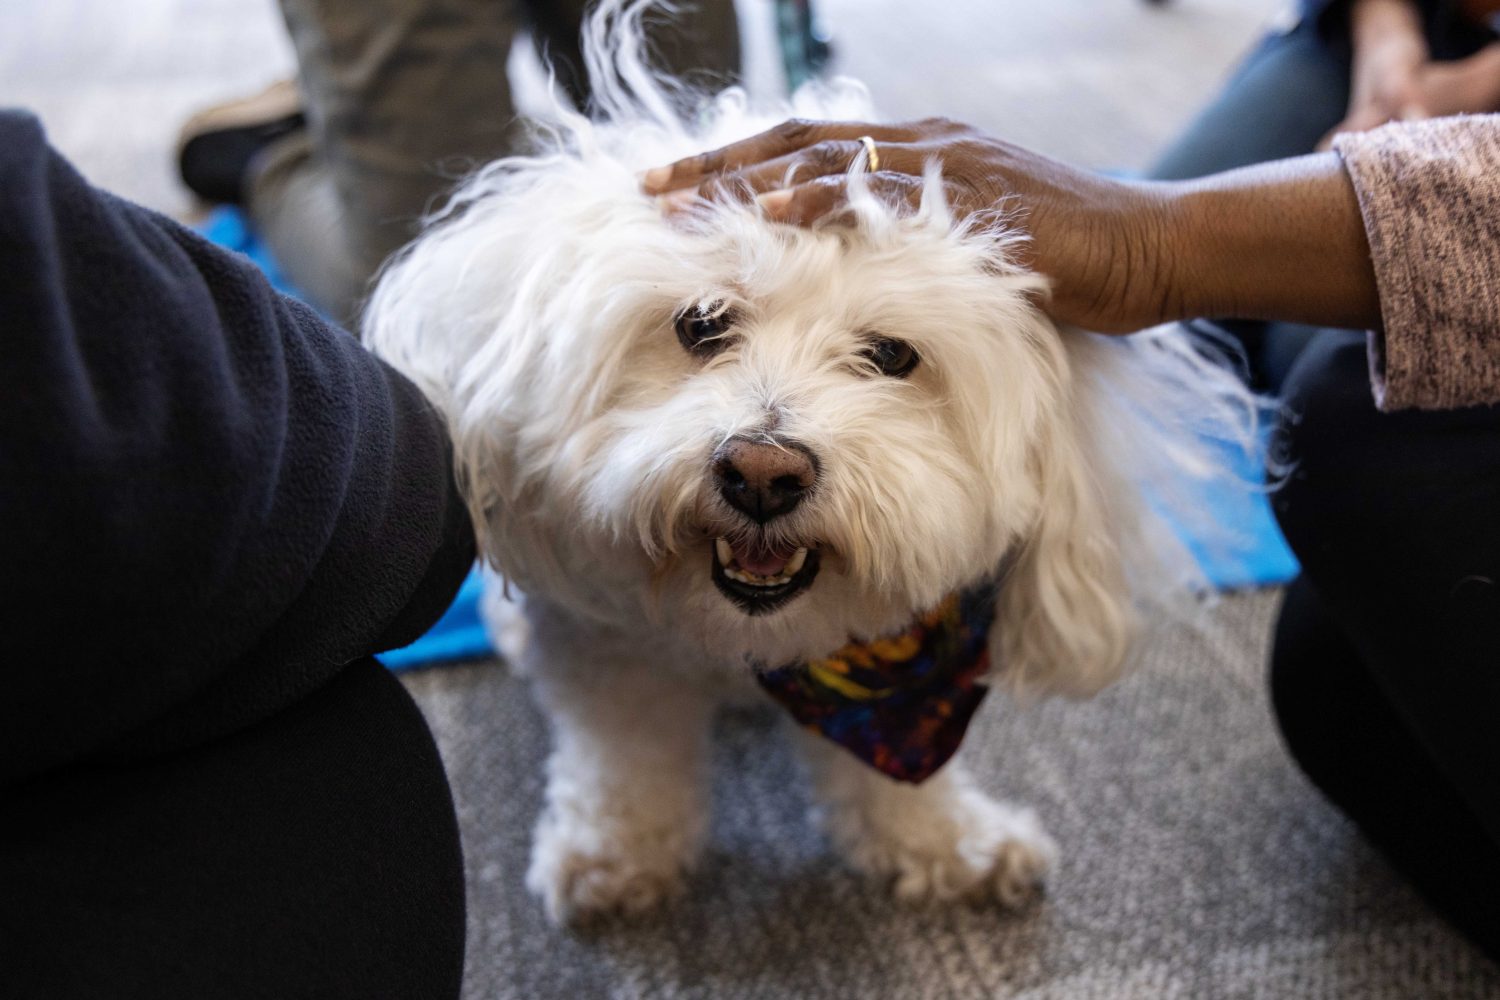 Chutzpa receives pets at the PAWS 10th anniversary at Wilson Library on Thursday, Nov. 16, 2023. Chutzpa majors in social work and loves cheese. (Photo/Adria Carpenter)